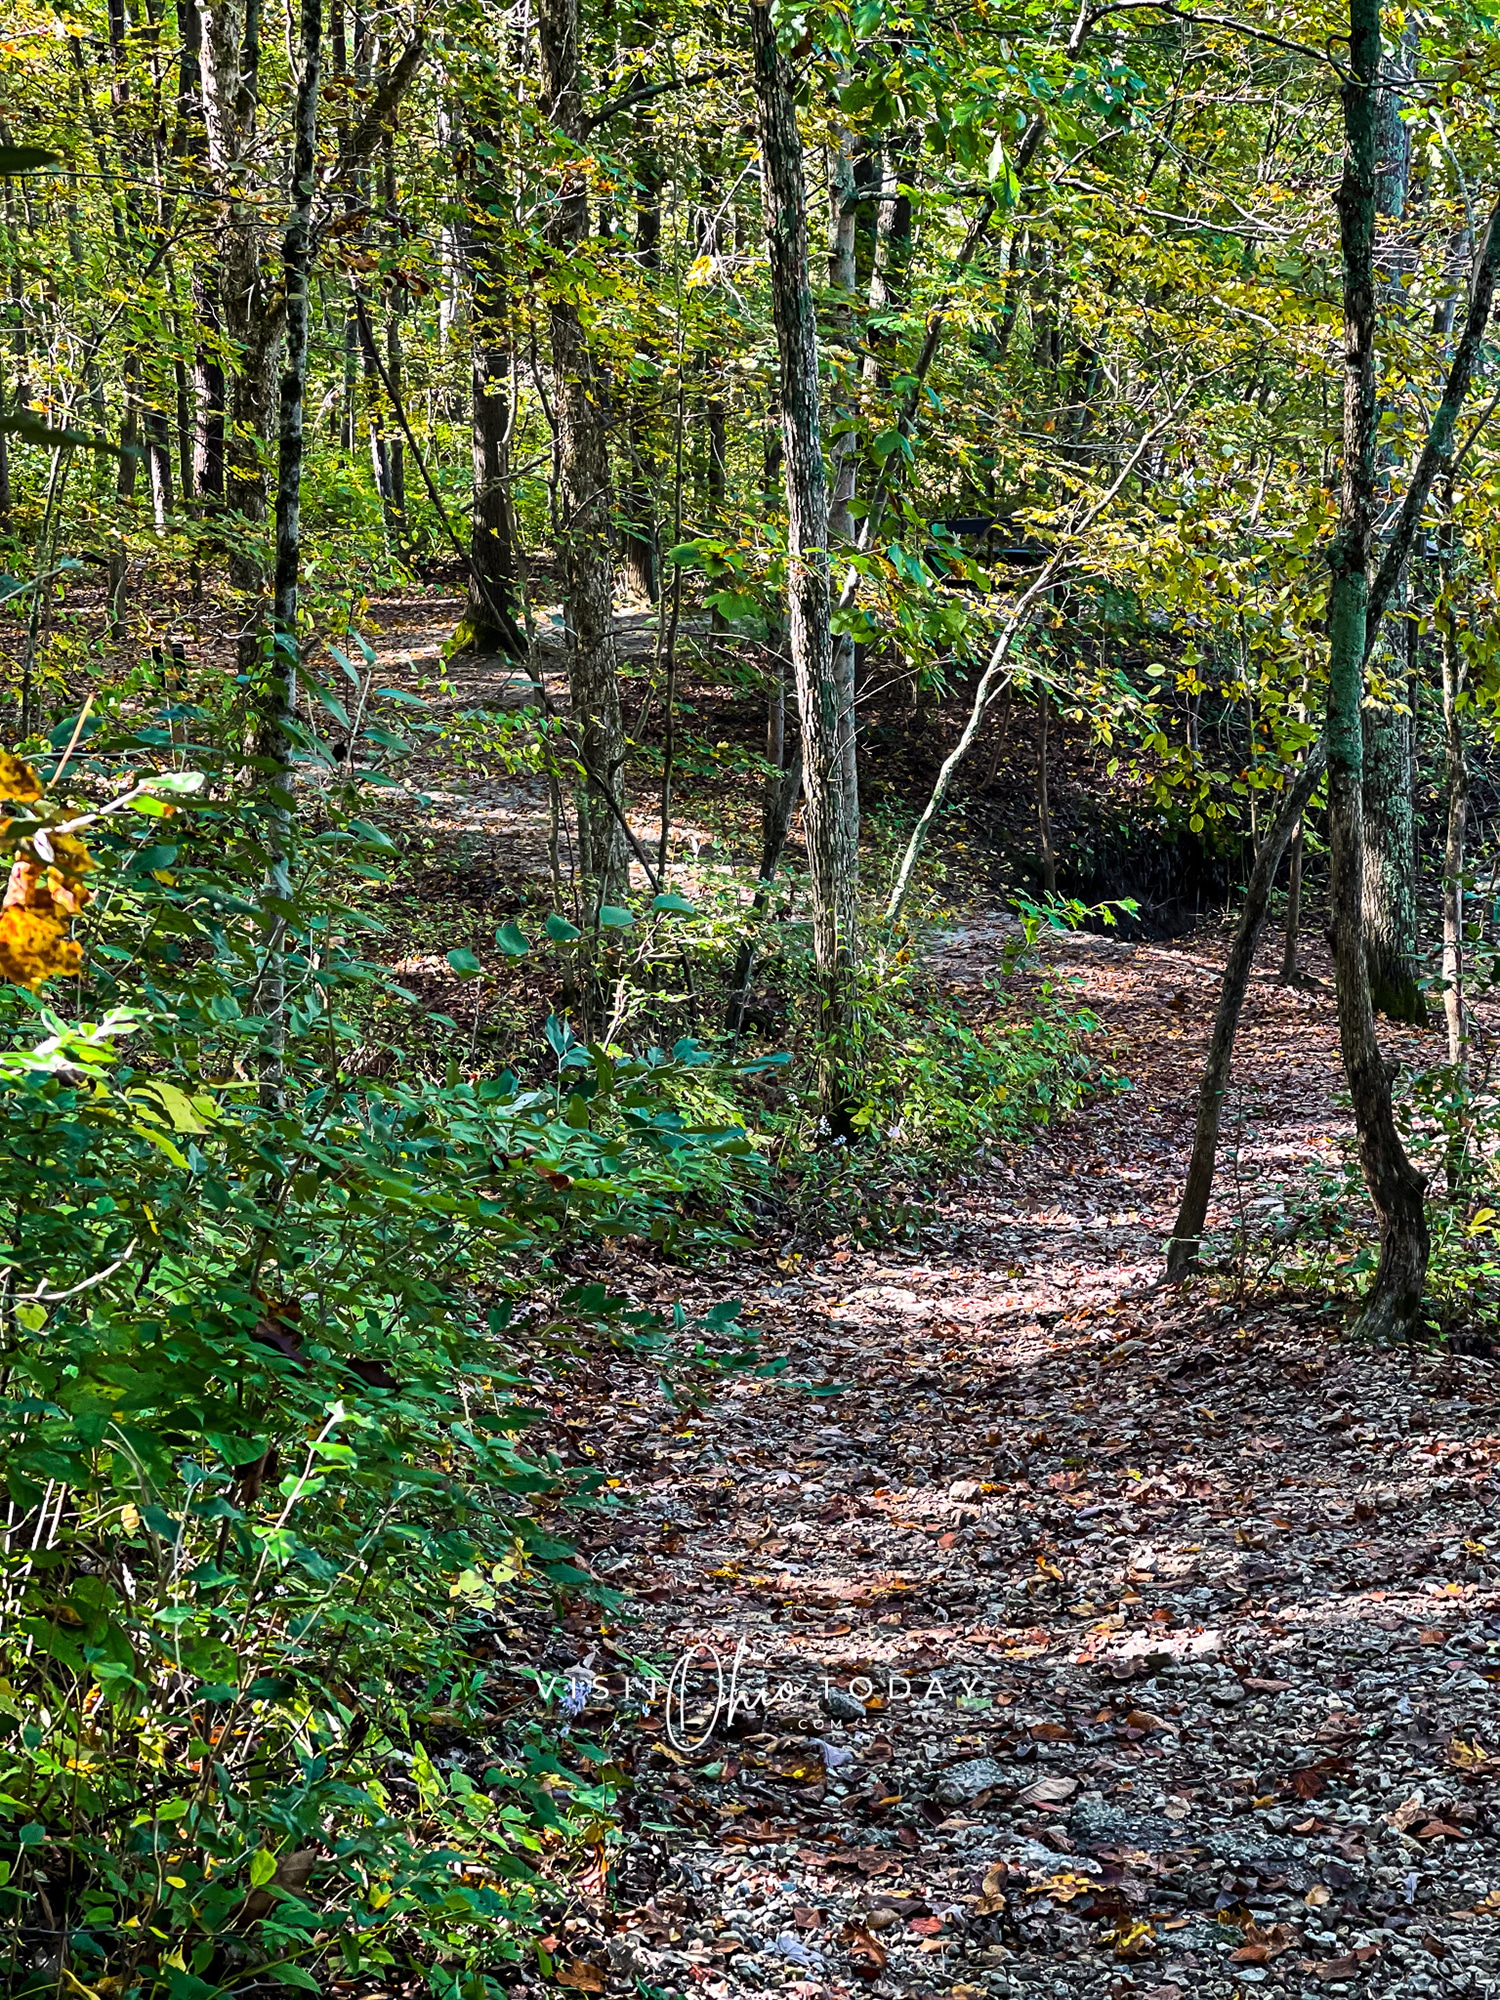 vertical image showing a trail path in battelle darby creek metro park with trees and foliage either side